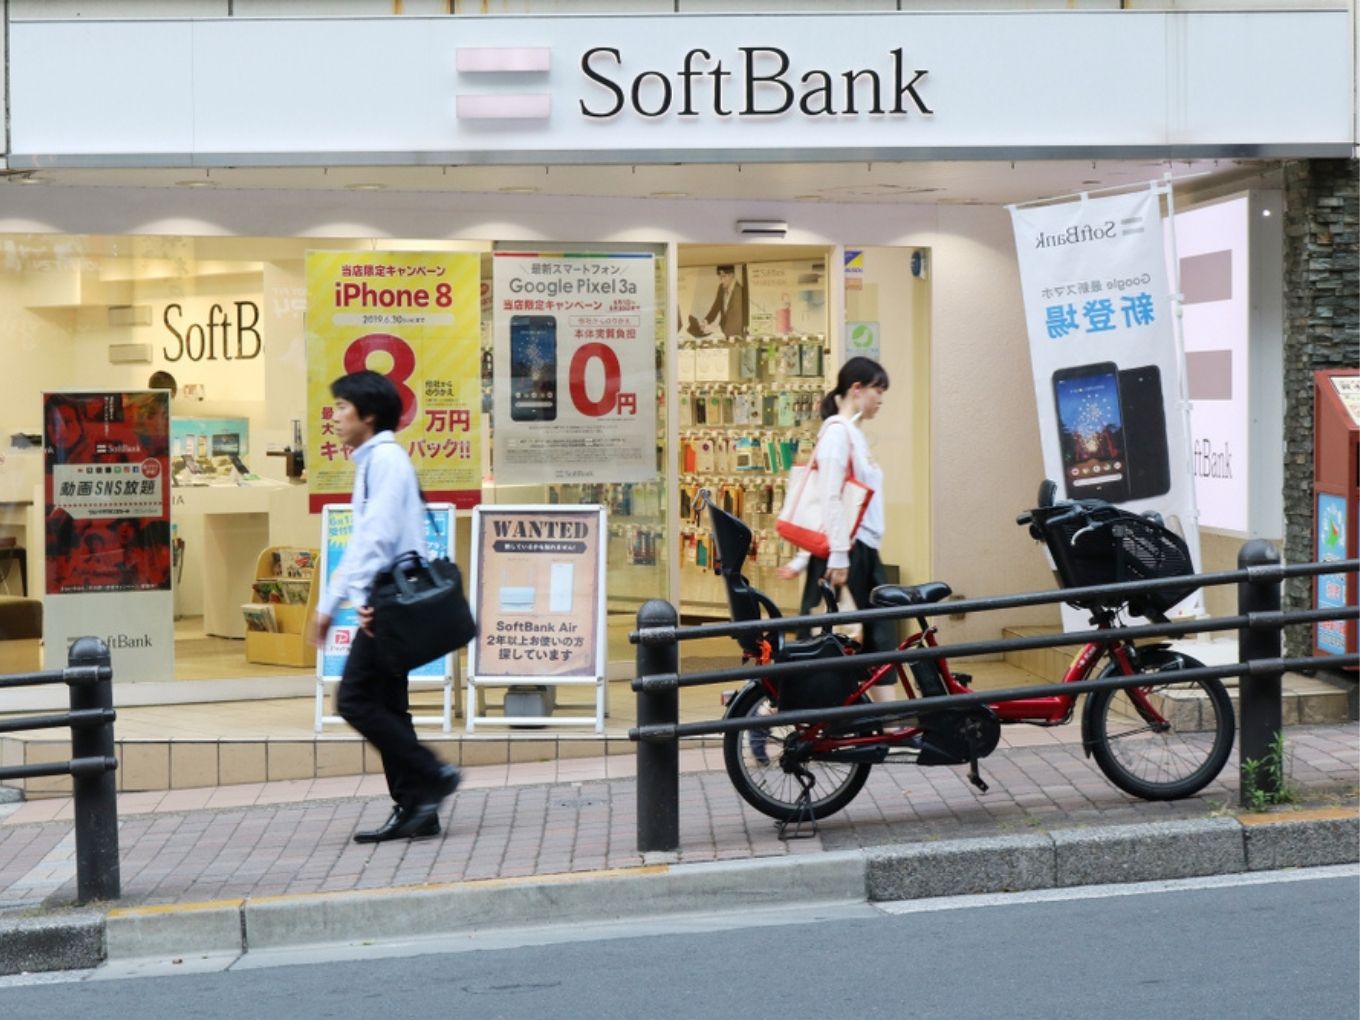 SoftBank Plans To Turn Things Around With Smaller Cheques, New Sectors